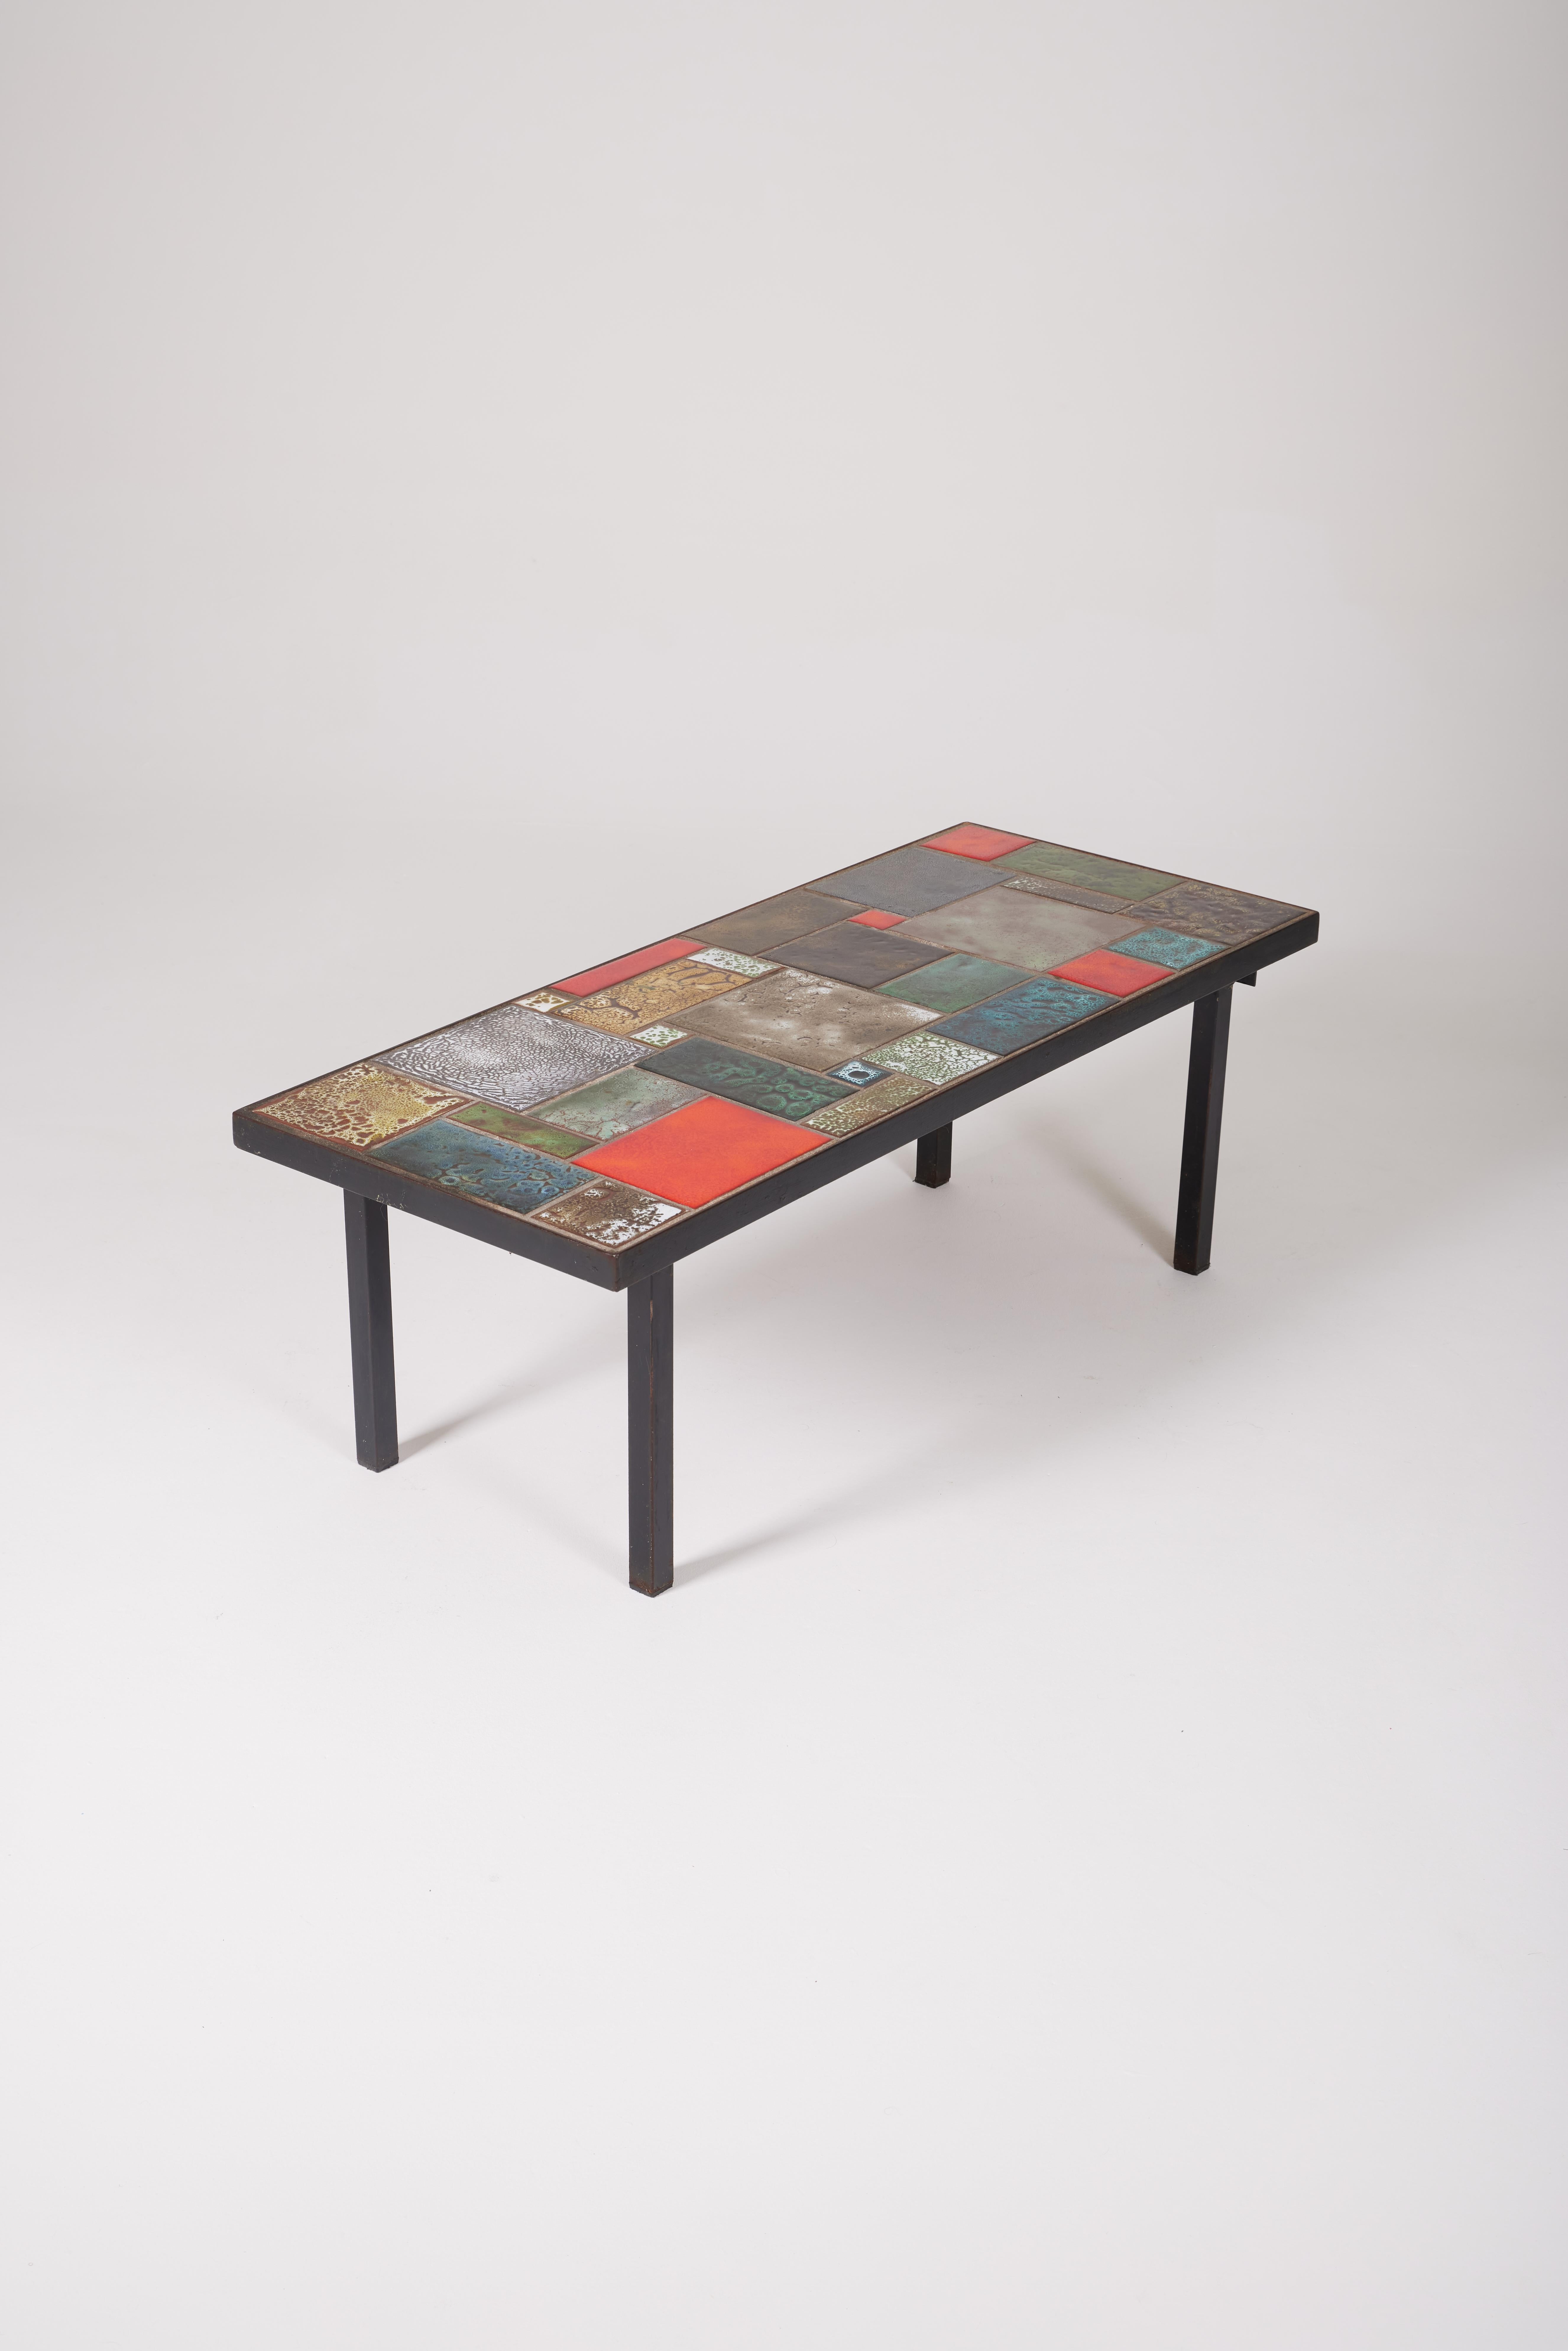 Ceramic coffee table. The tabletop is in blue, red, and gray ceramic. The structure is made of metal. In very good condition.
LP1398